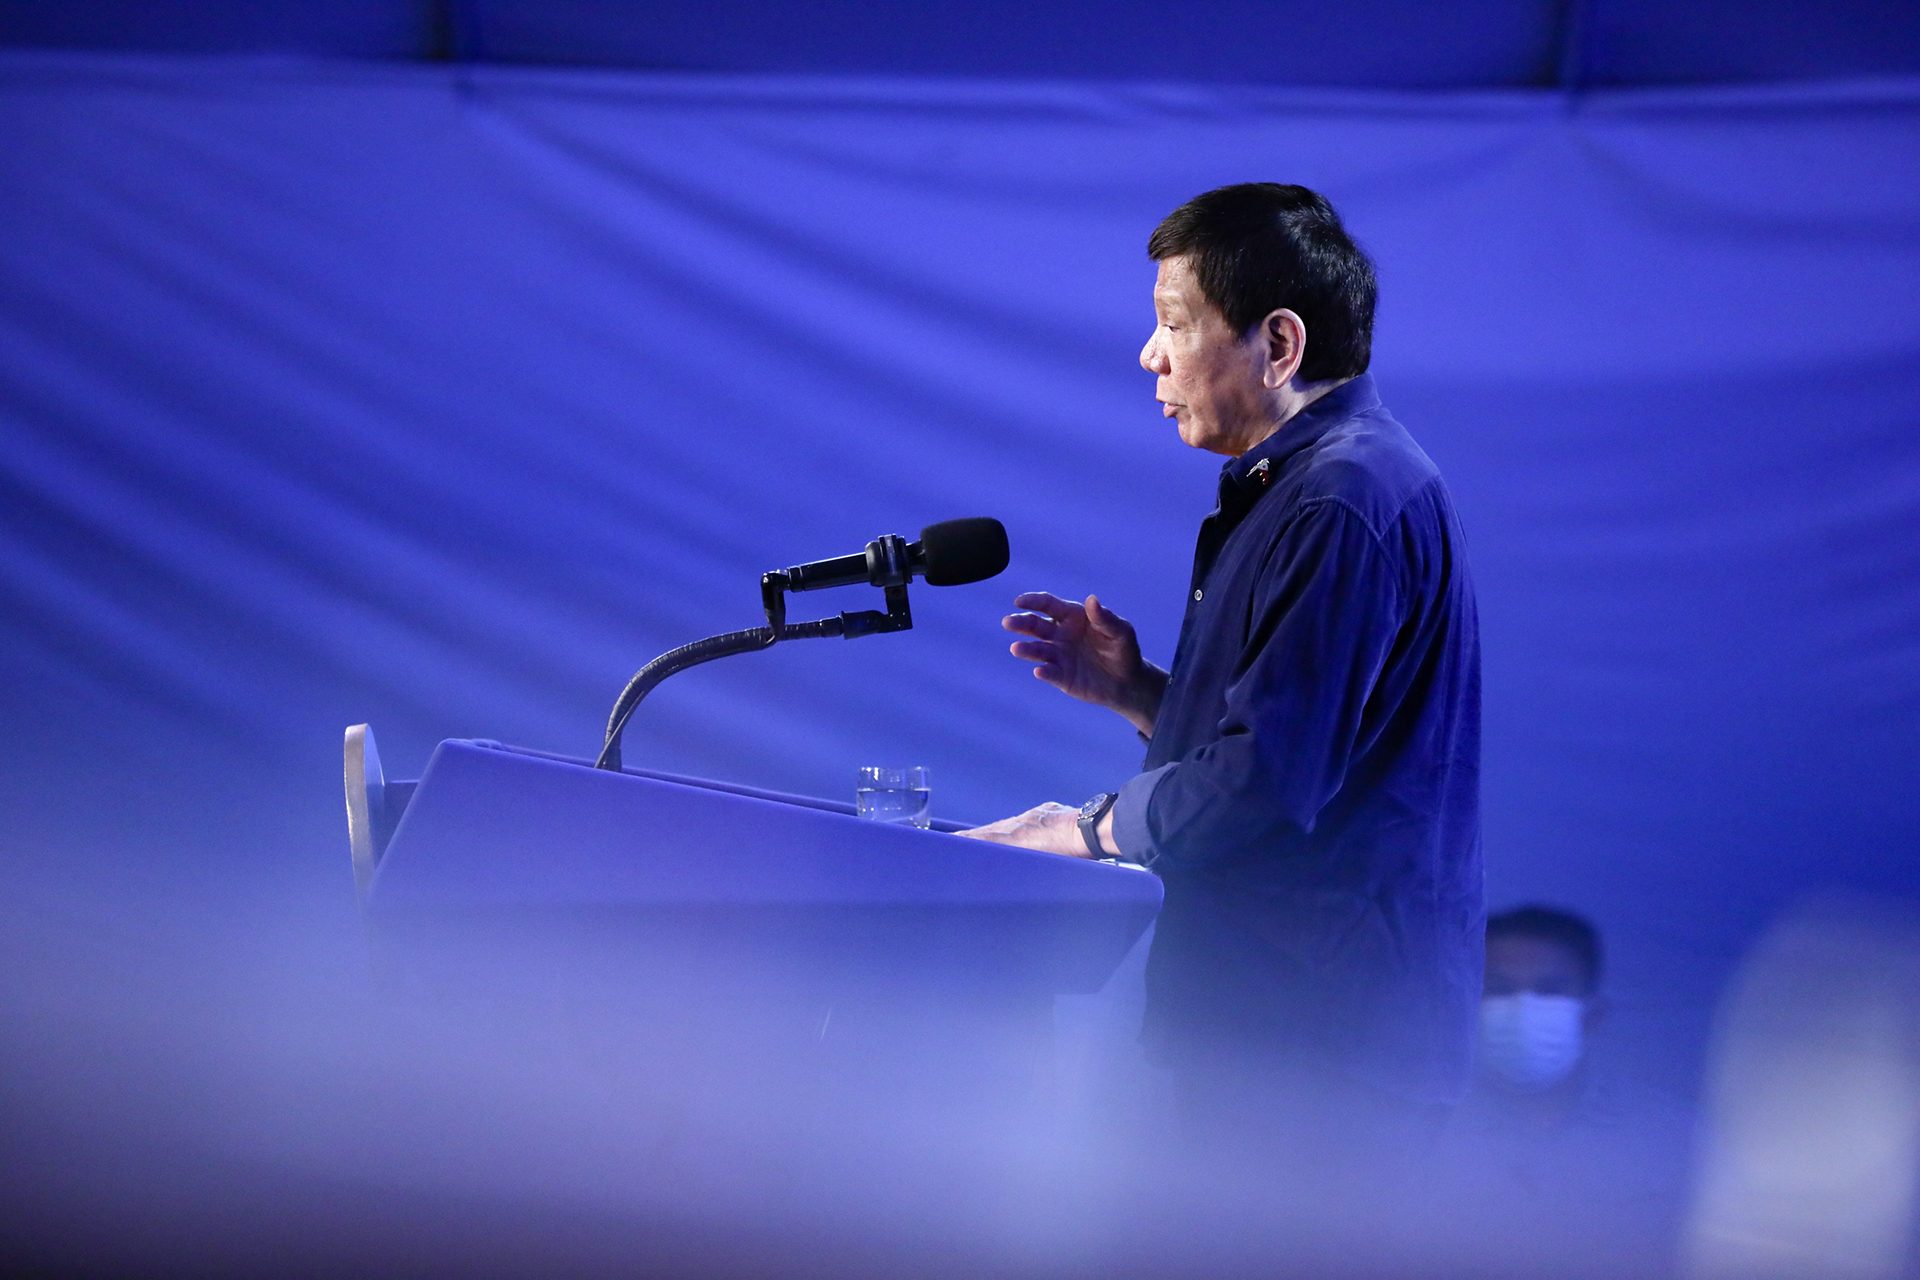 Up until last day of campaigning, Duterte does not endorse Marcos for president